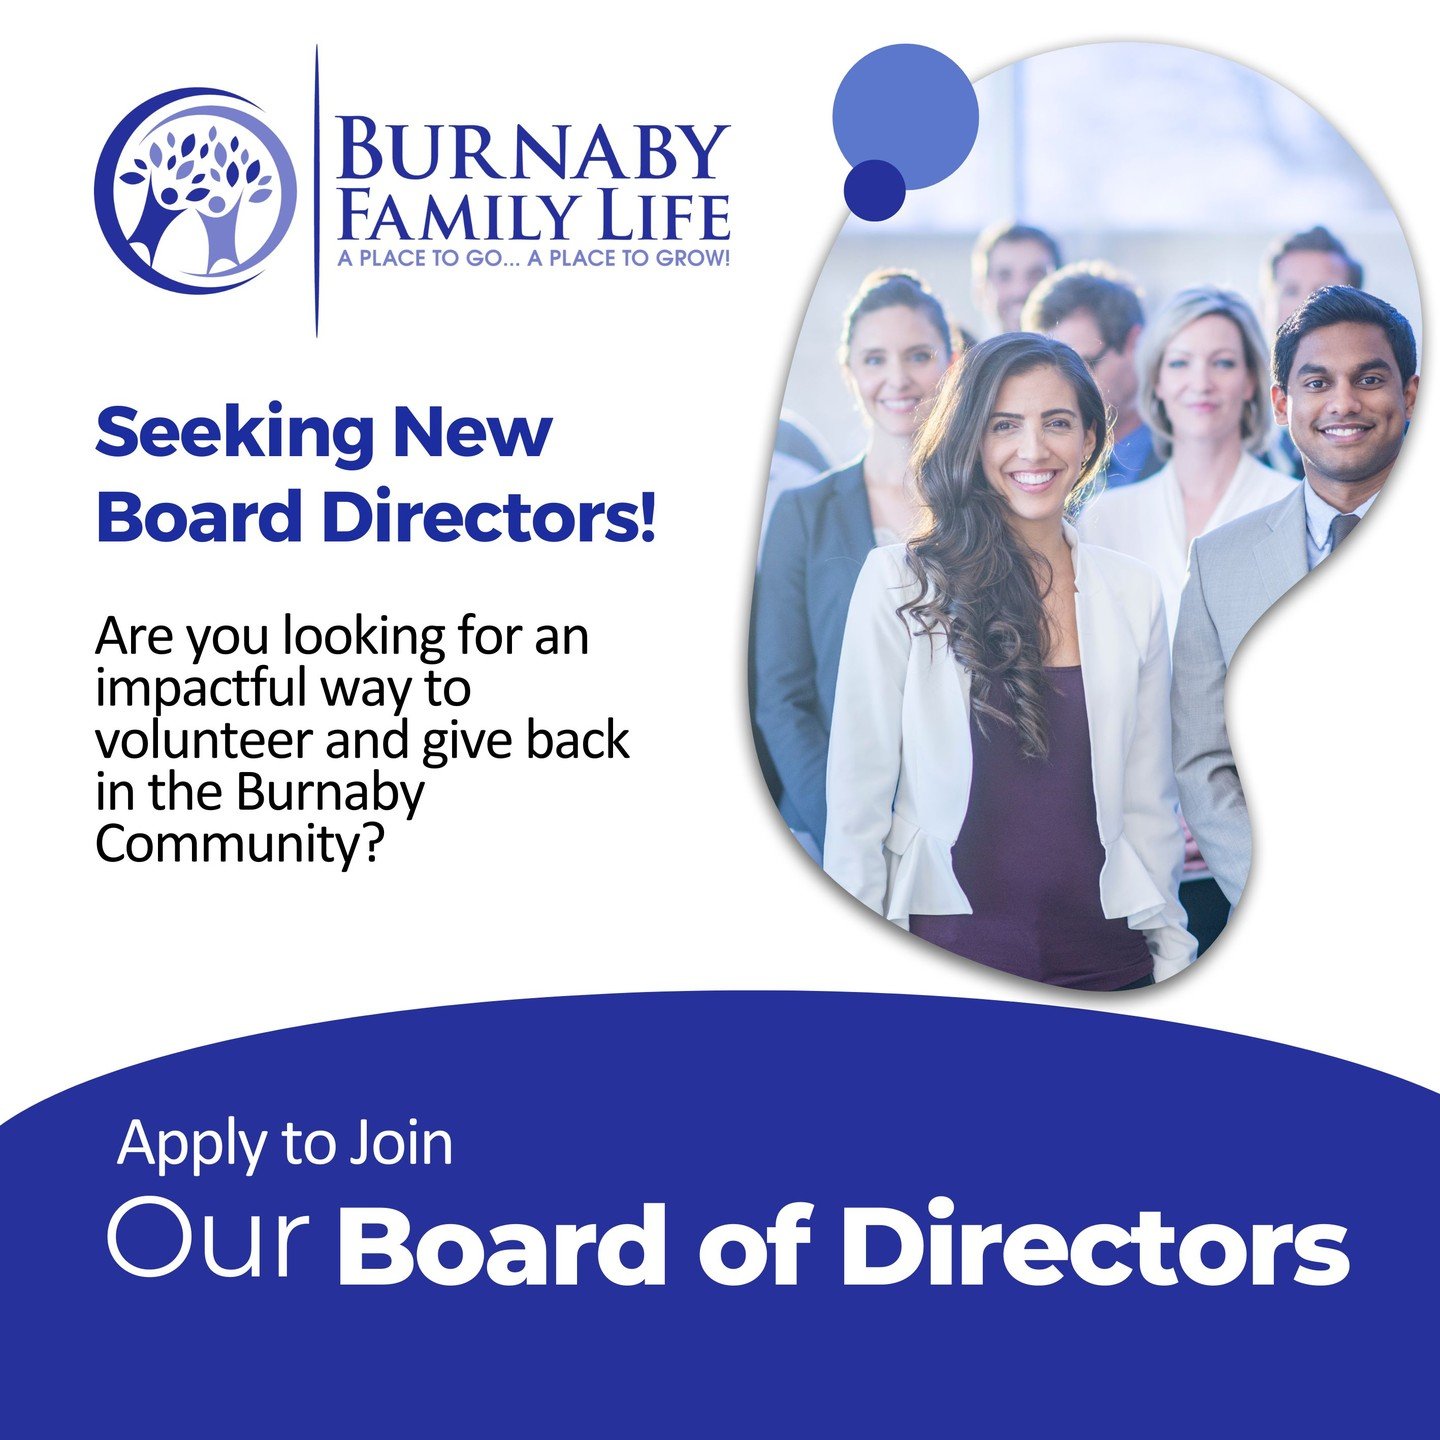 Do you want to be part of a non-profit organization dedicated to supporting children, families, newcomers, and the Burnaby community? 

We're currently seeking enthusiastic volunteers who bring a diverse group of backgrounds, experiences, opinions, a